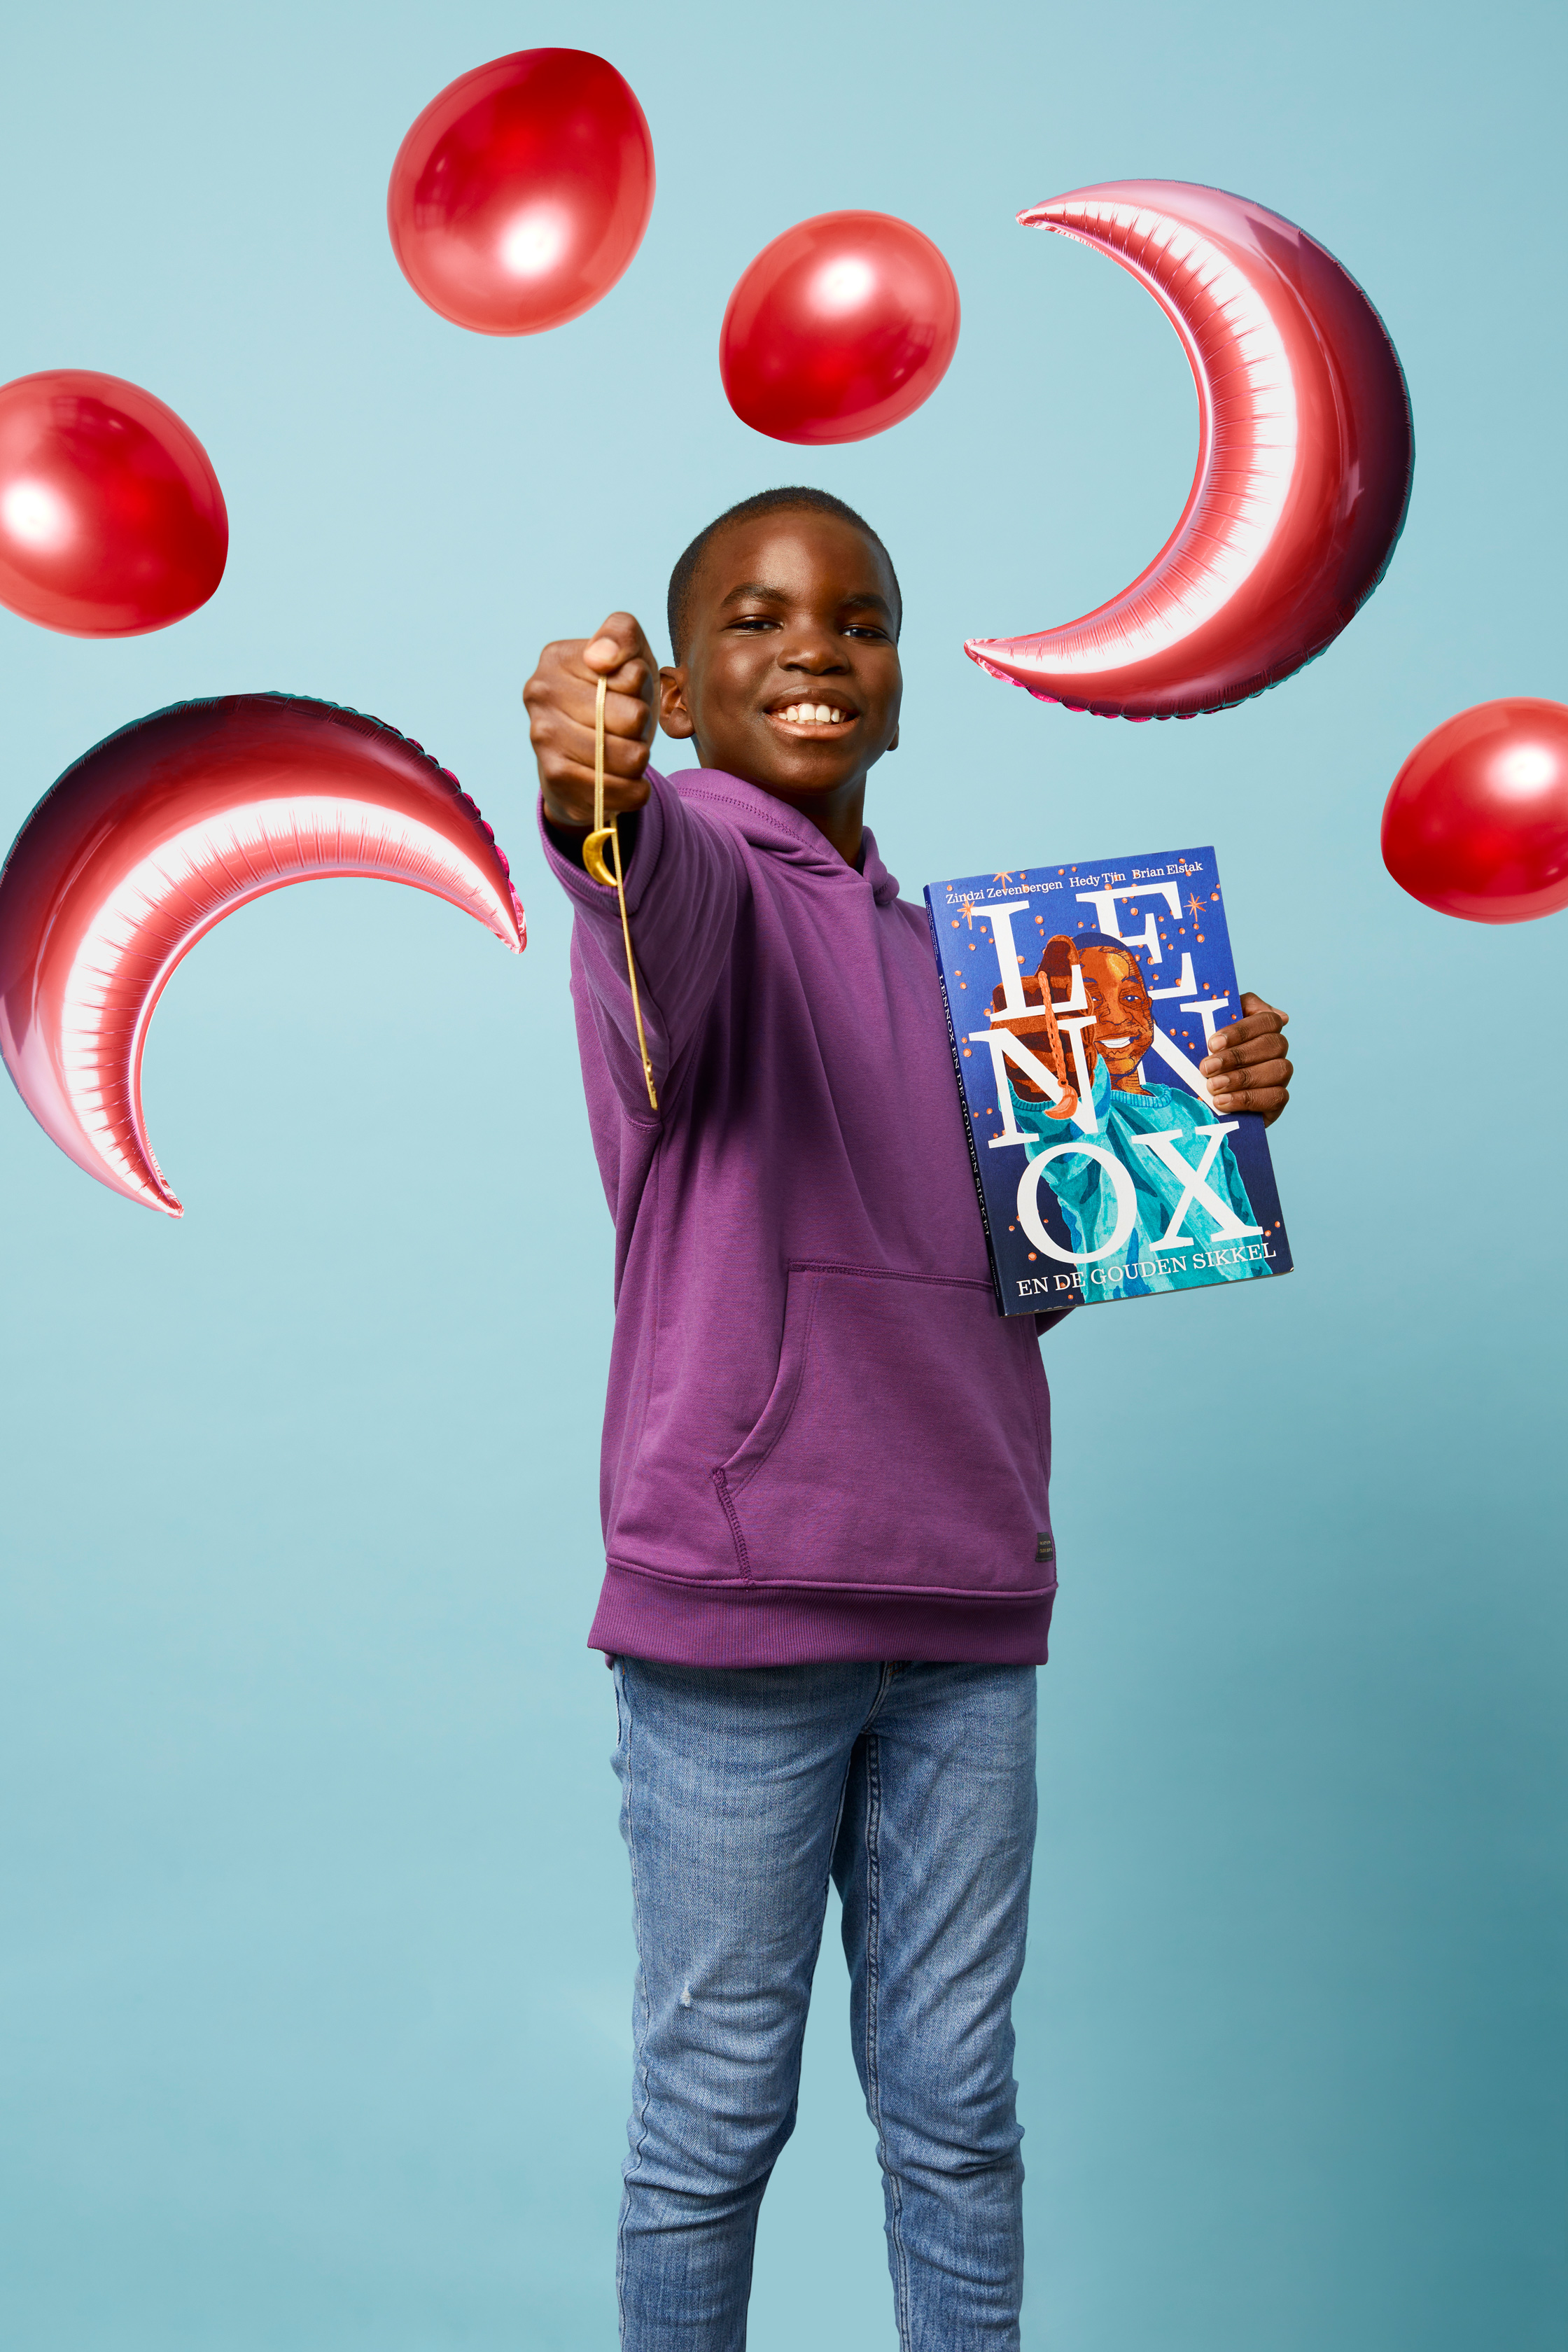 Lennox campaign image; boy with moon necklace and book 'Lennox'